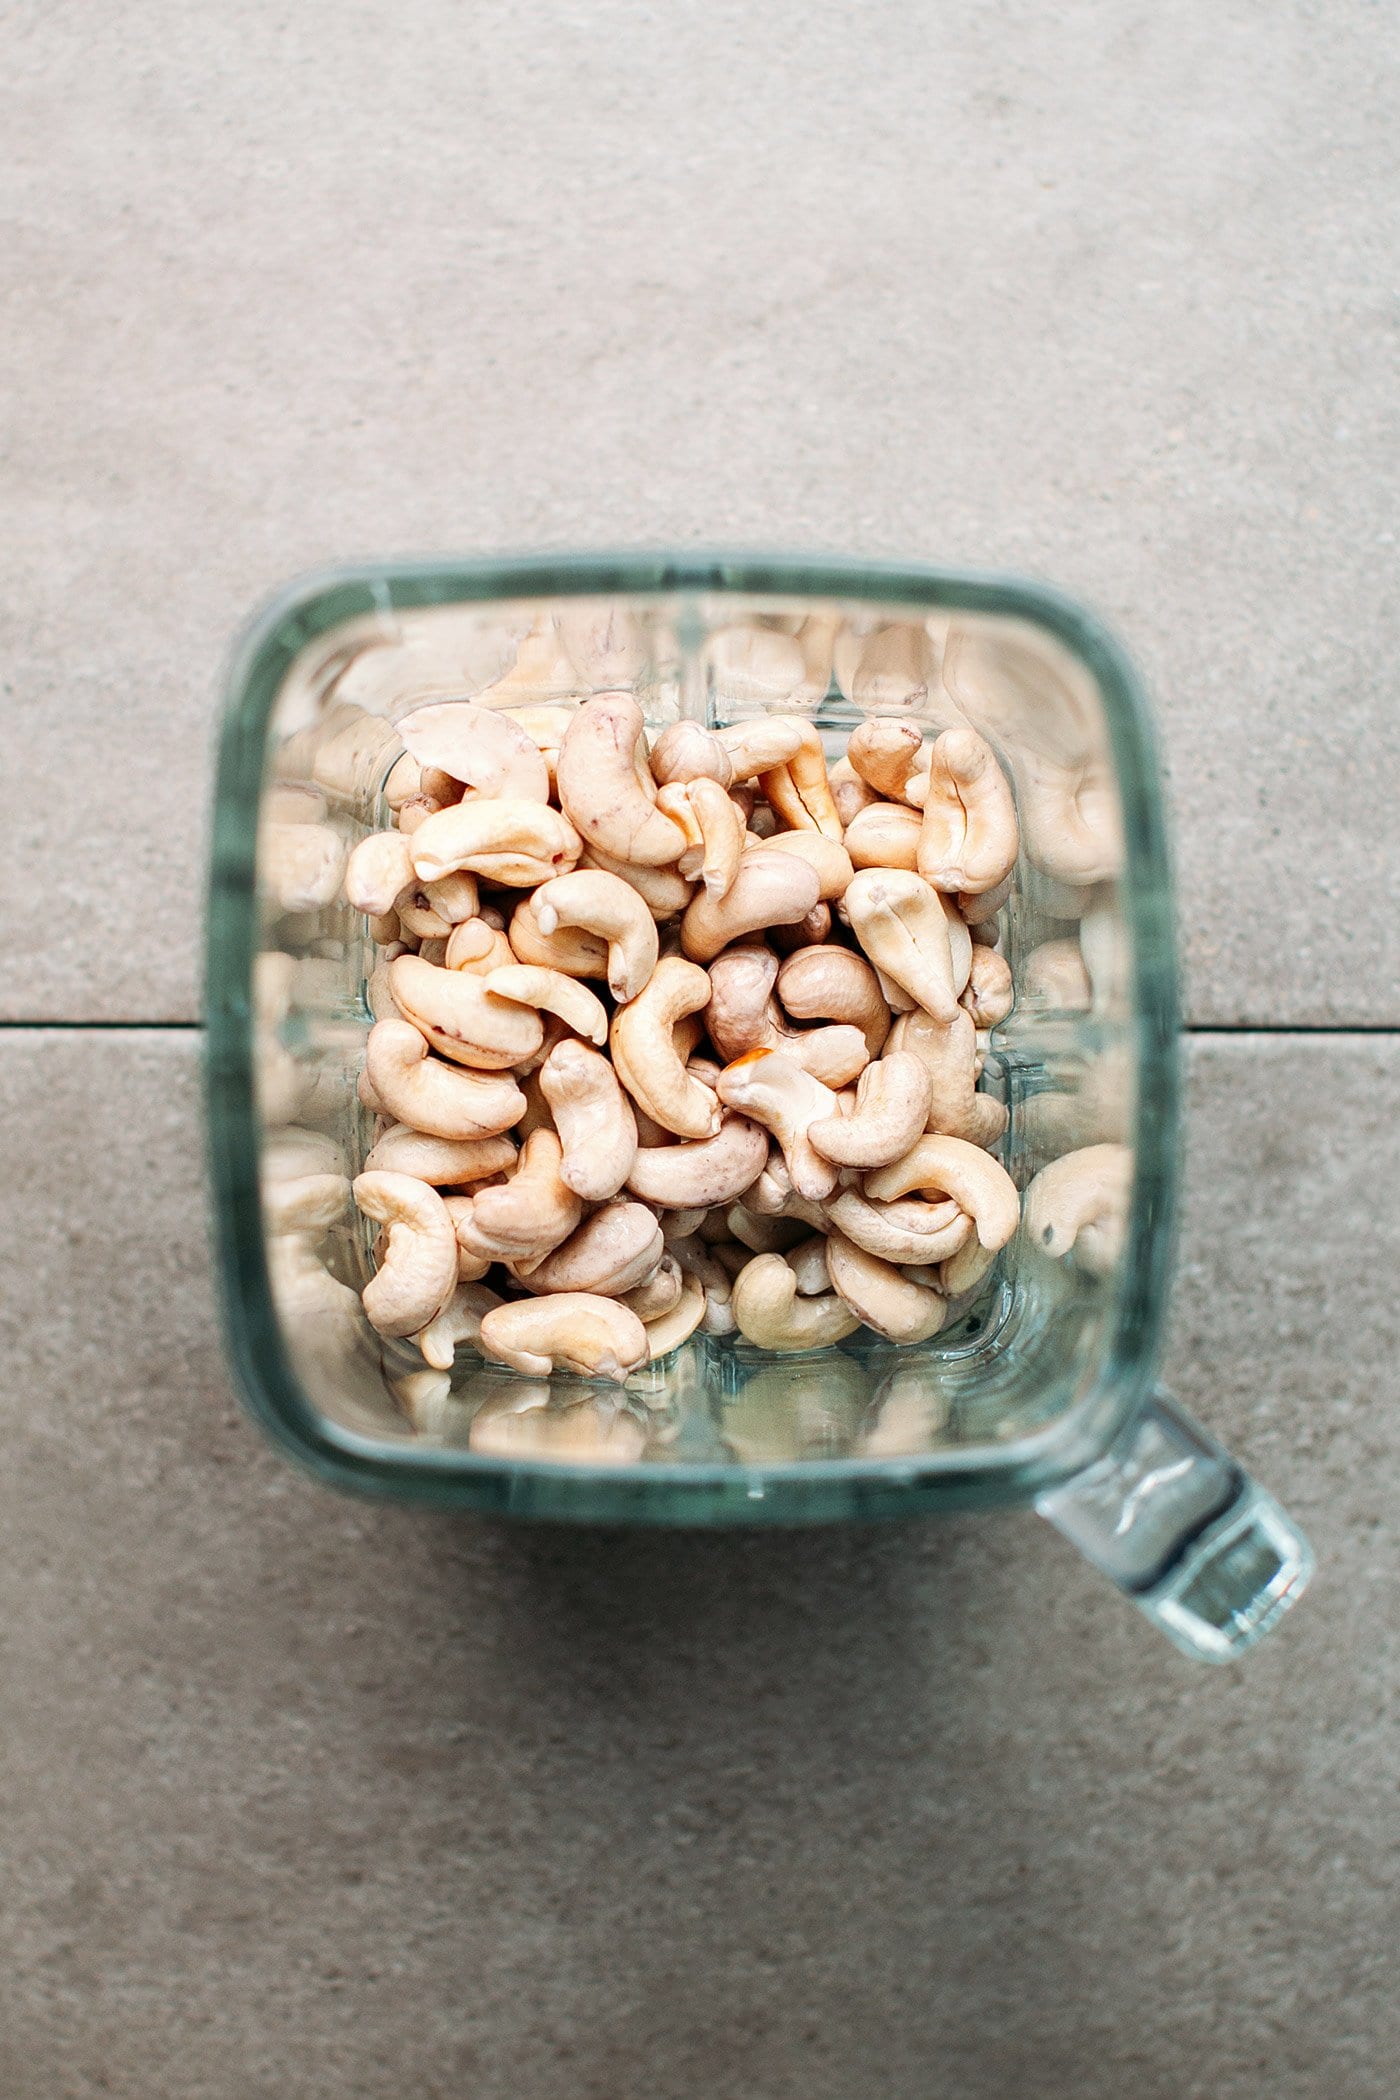 Soaked cashews in the bowl of a blender